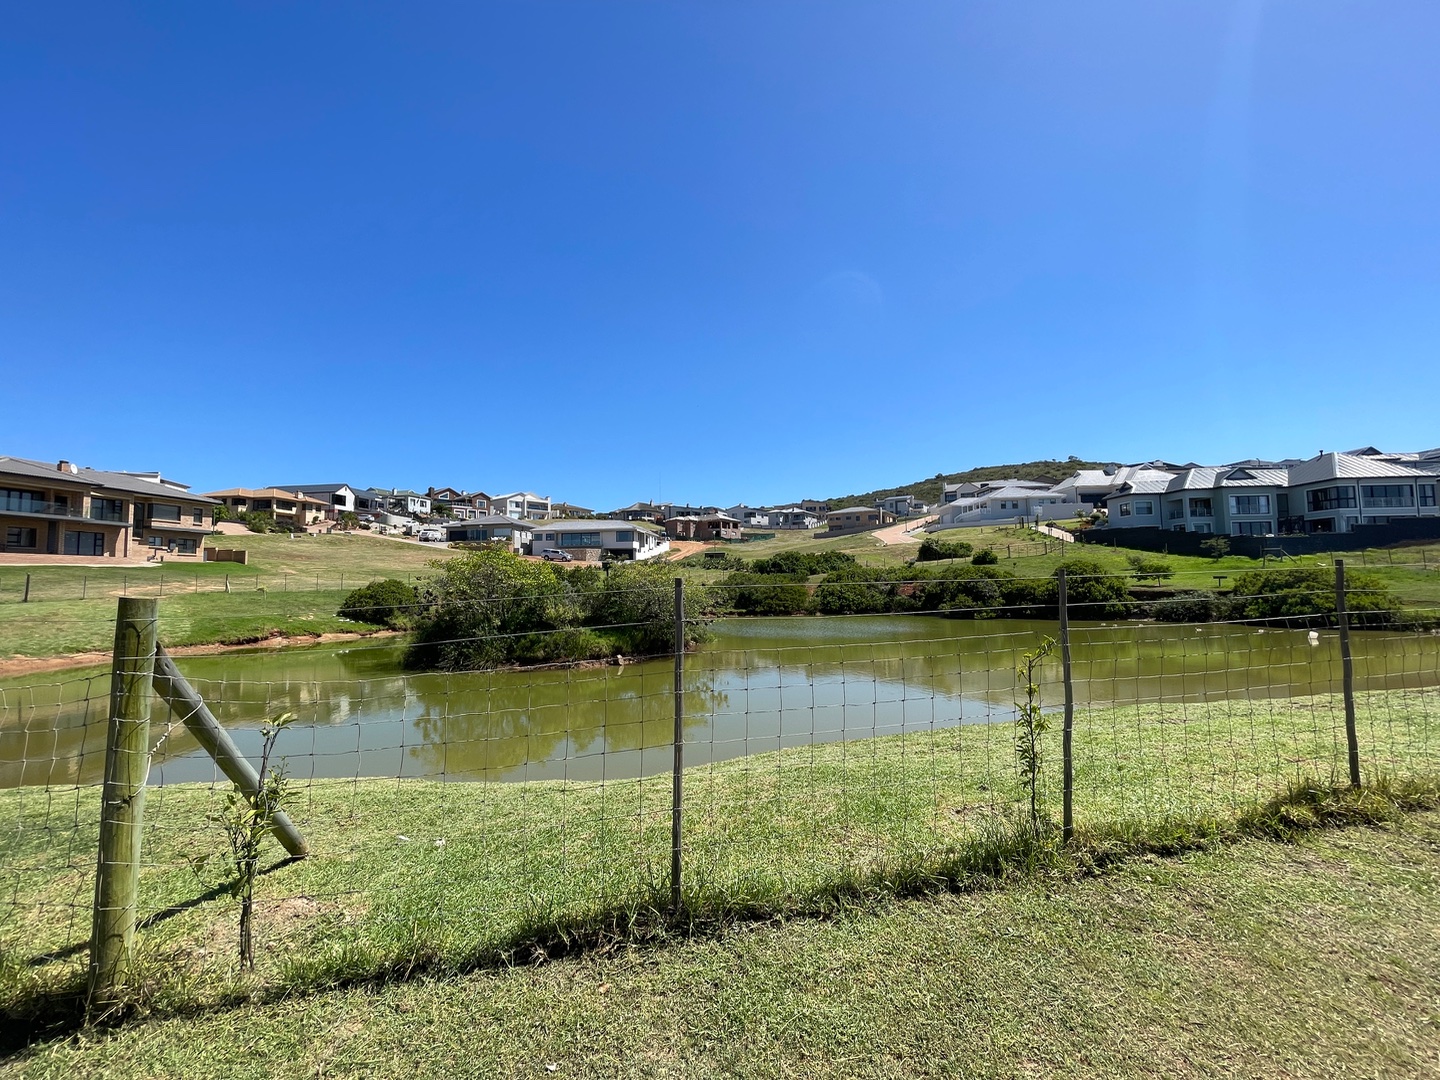  Bedroom Property for Sale in Monte Christo Western Cape